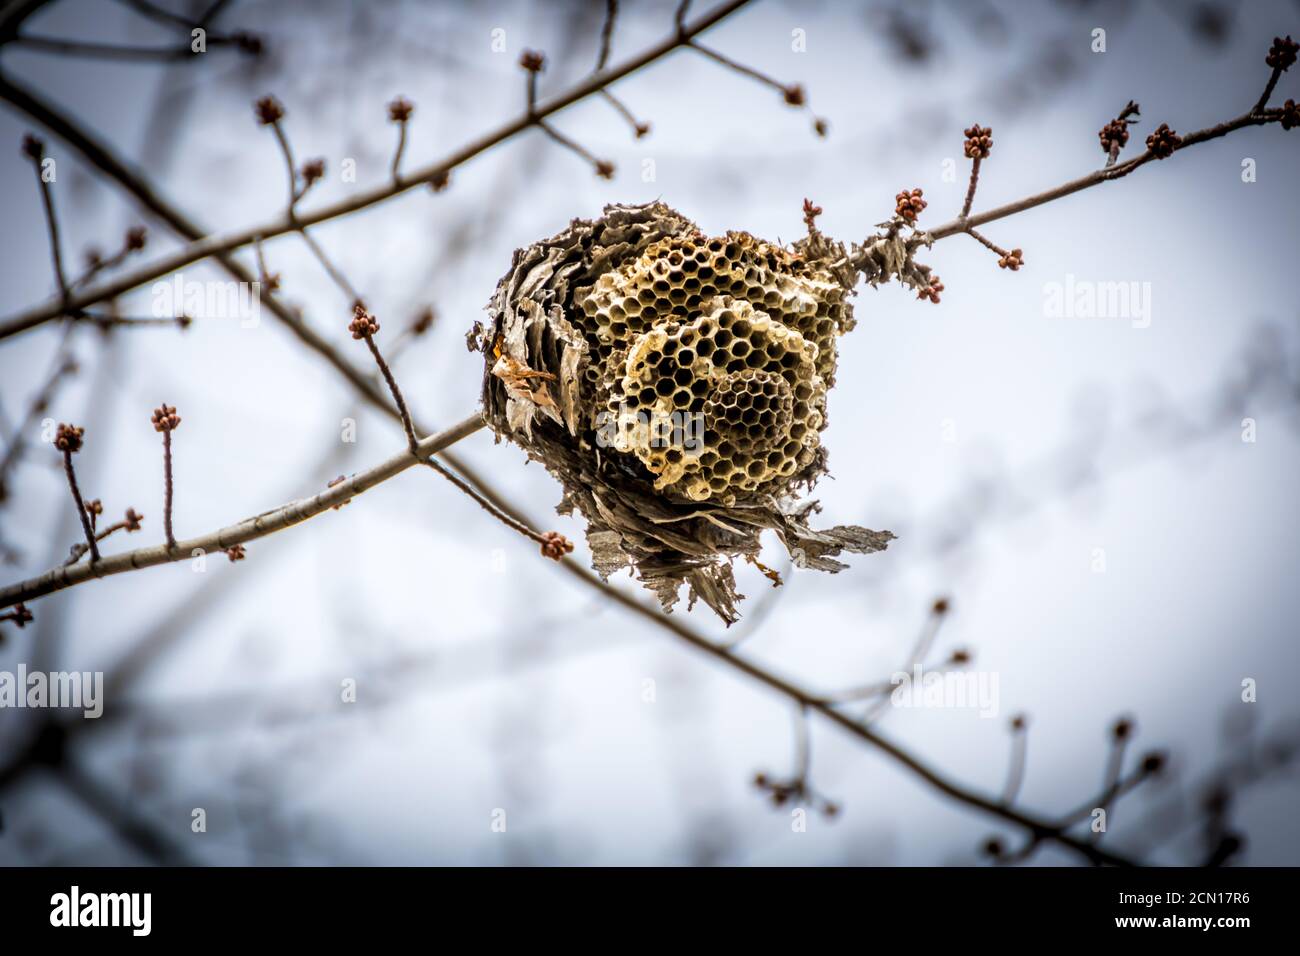 Broken beehive during the winter months Stock Photo